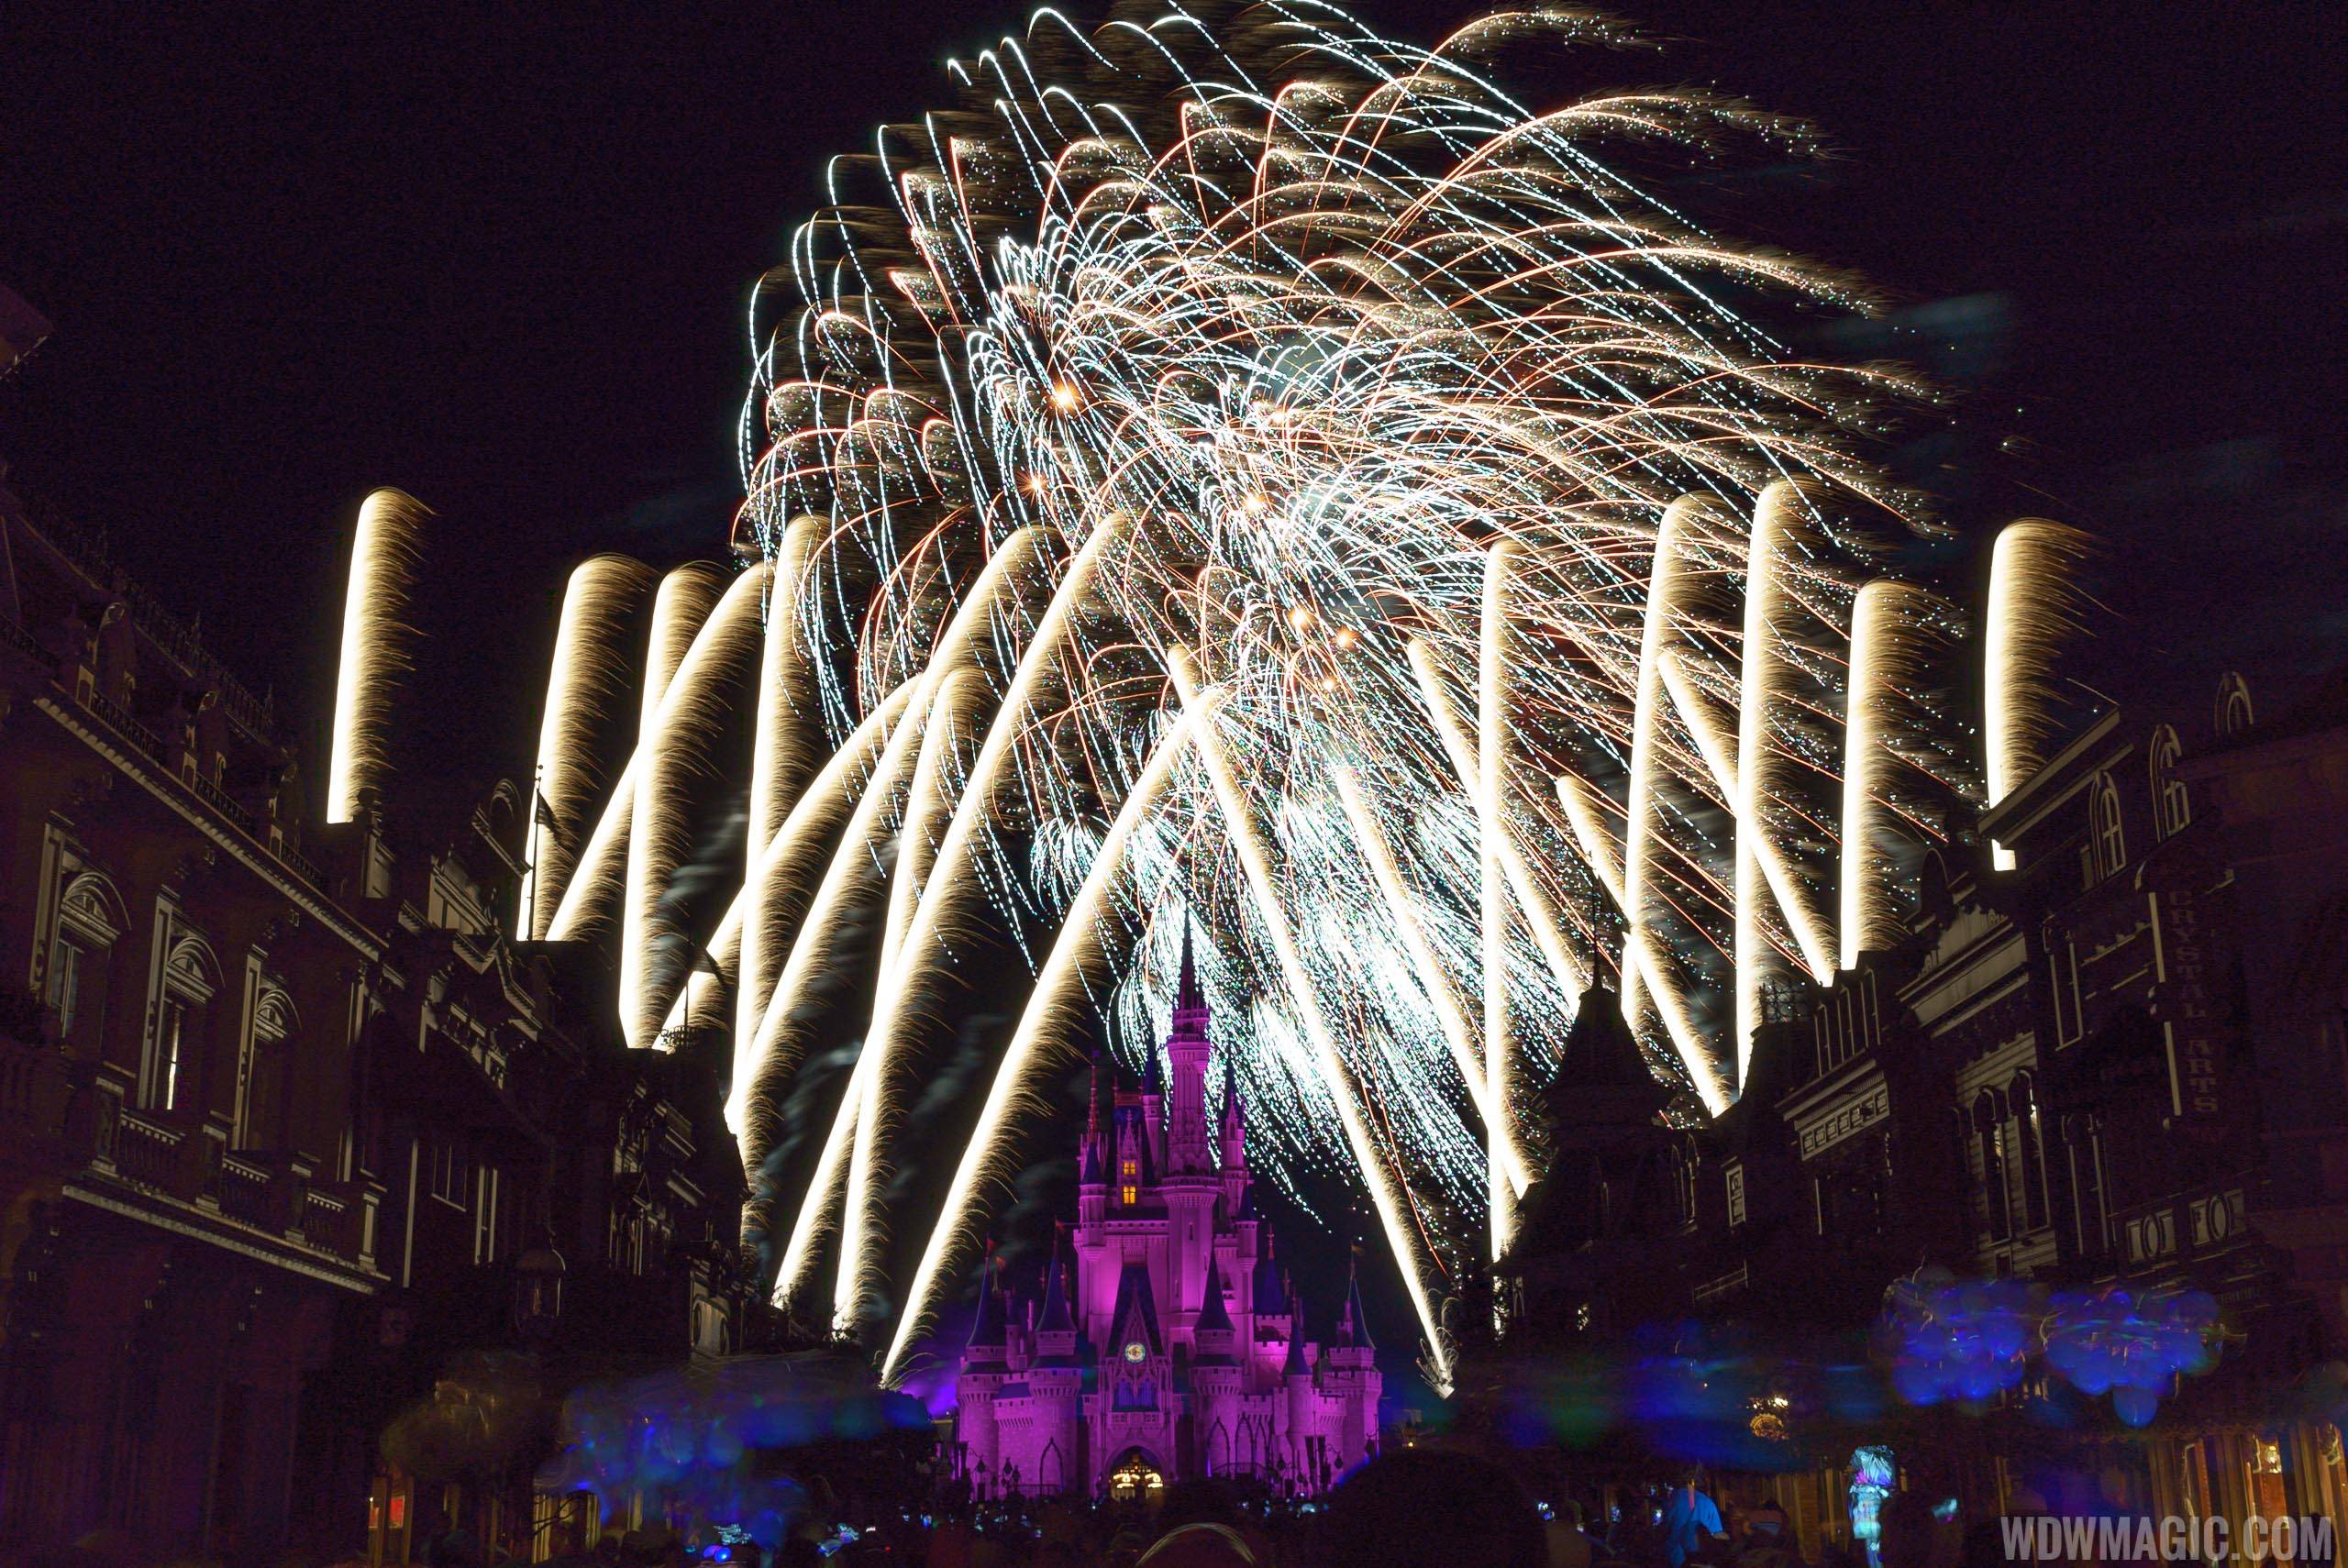 Wishes a must see